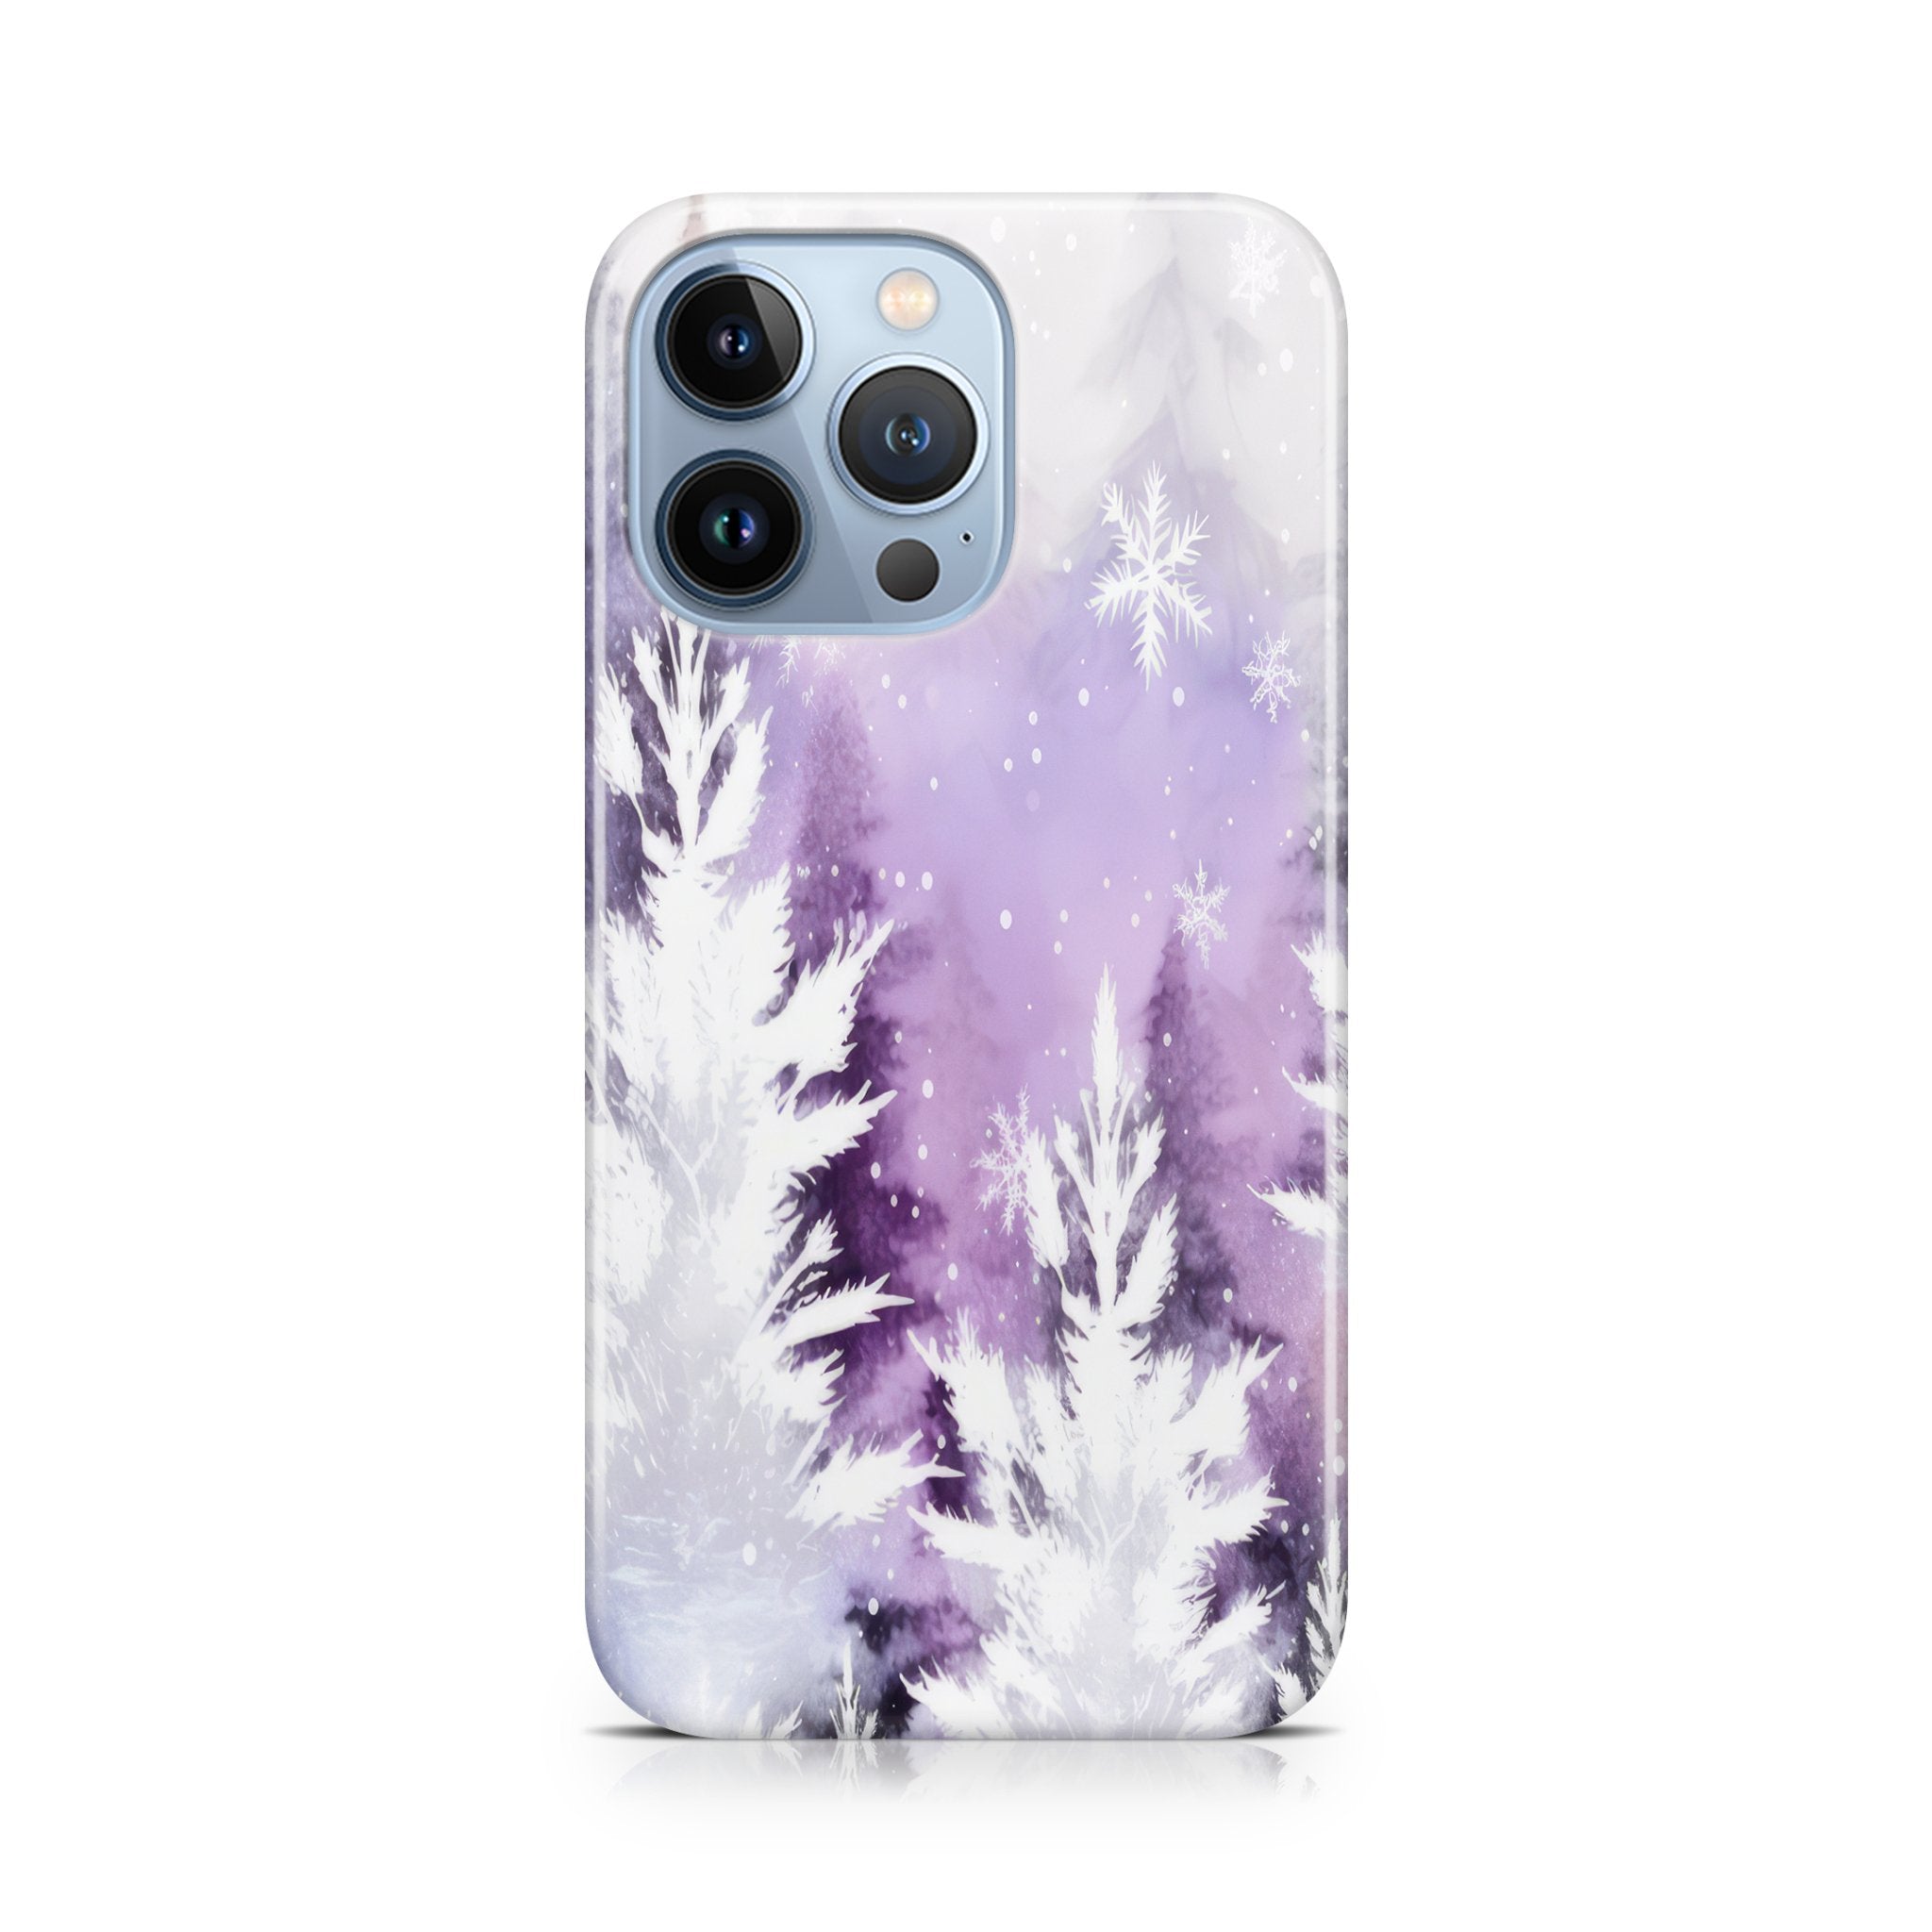 Snowy Forest - iPhone phone case designs by CaseSwagger